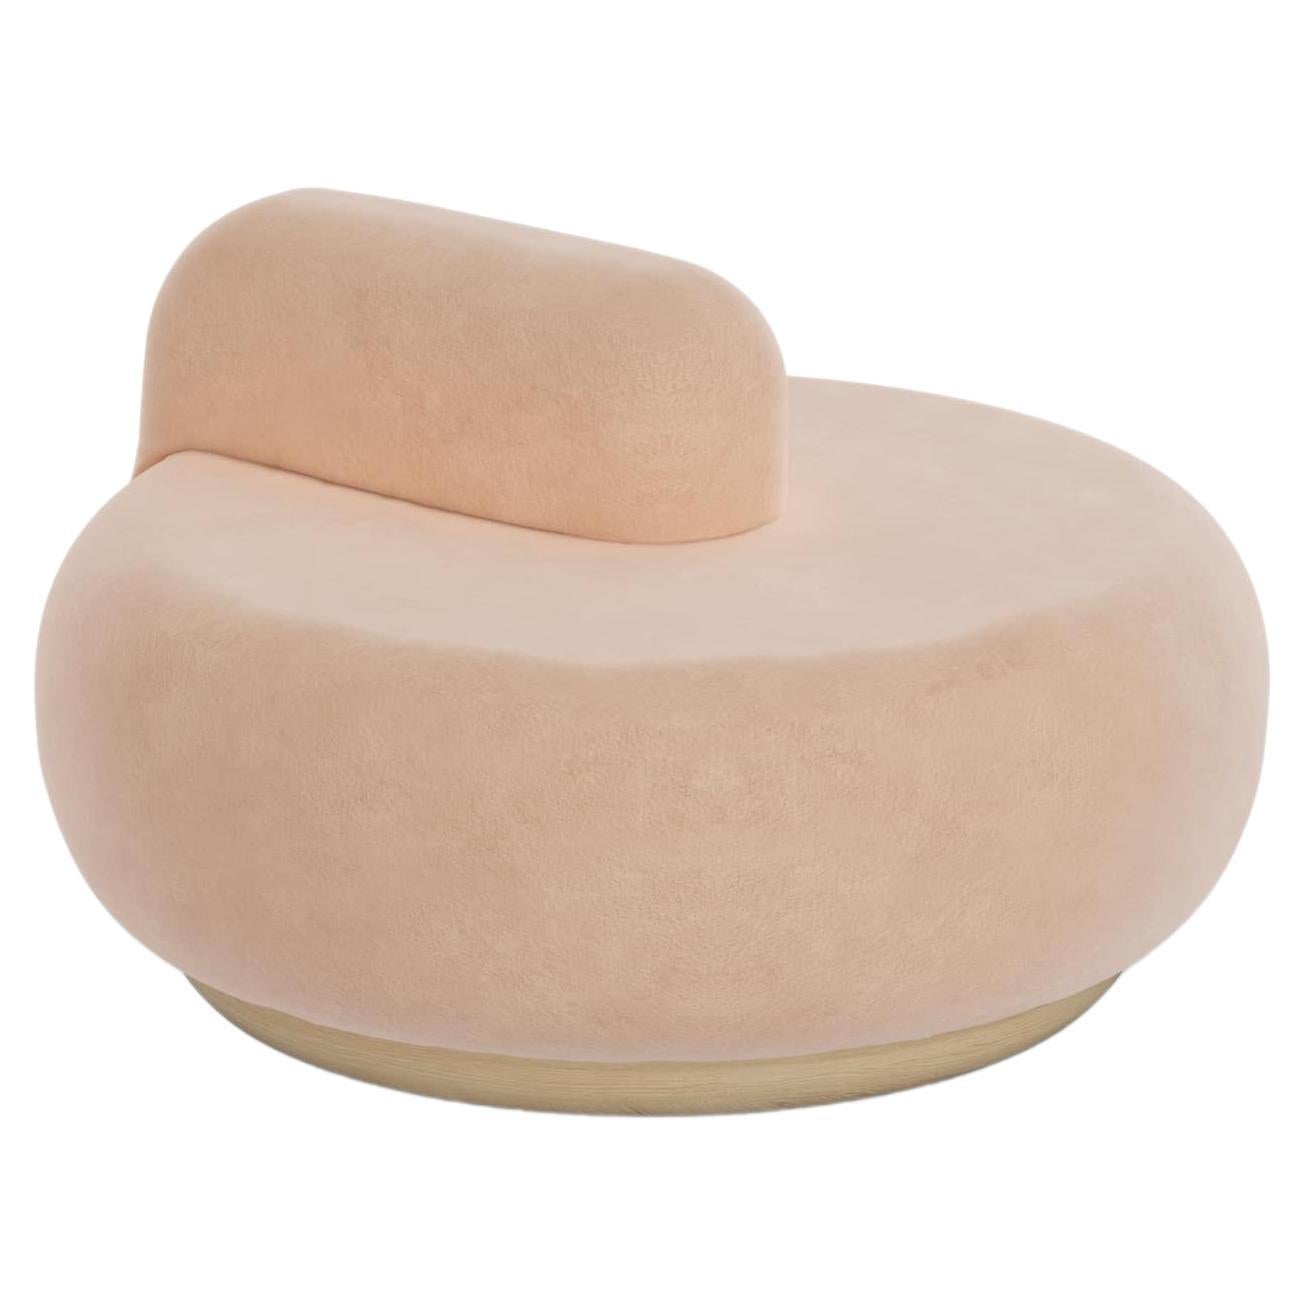 Naked Pouf 2 with Smooth Blossom Fabric and Natural Wood Base For Sale